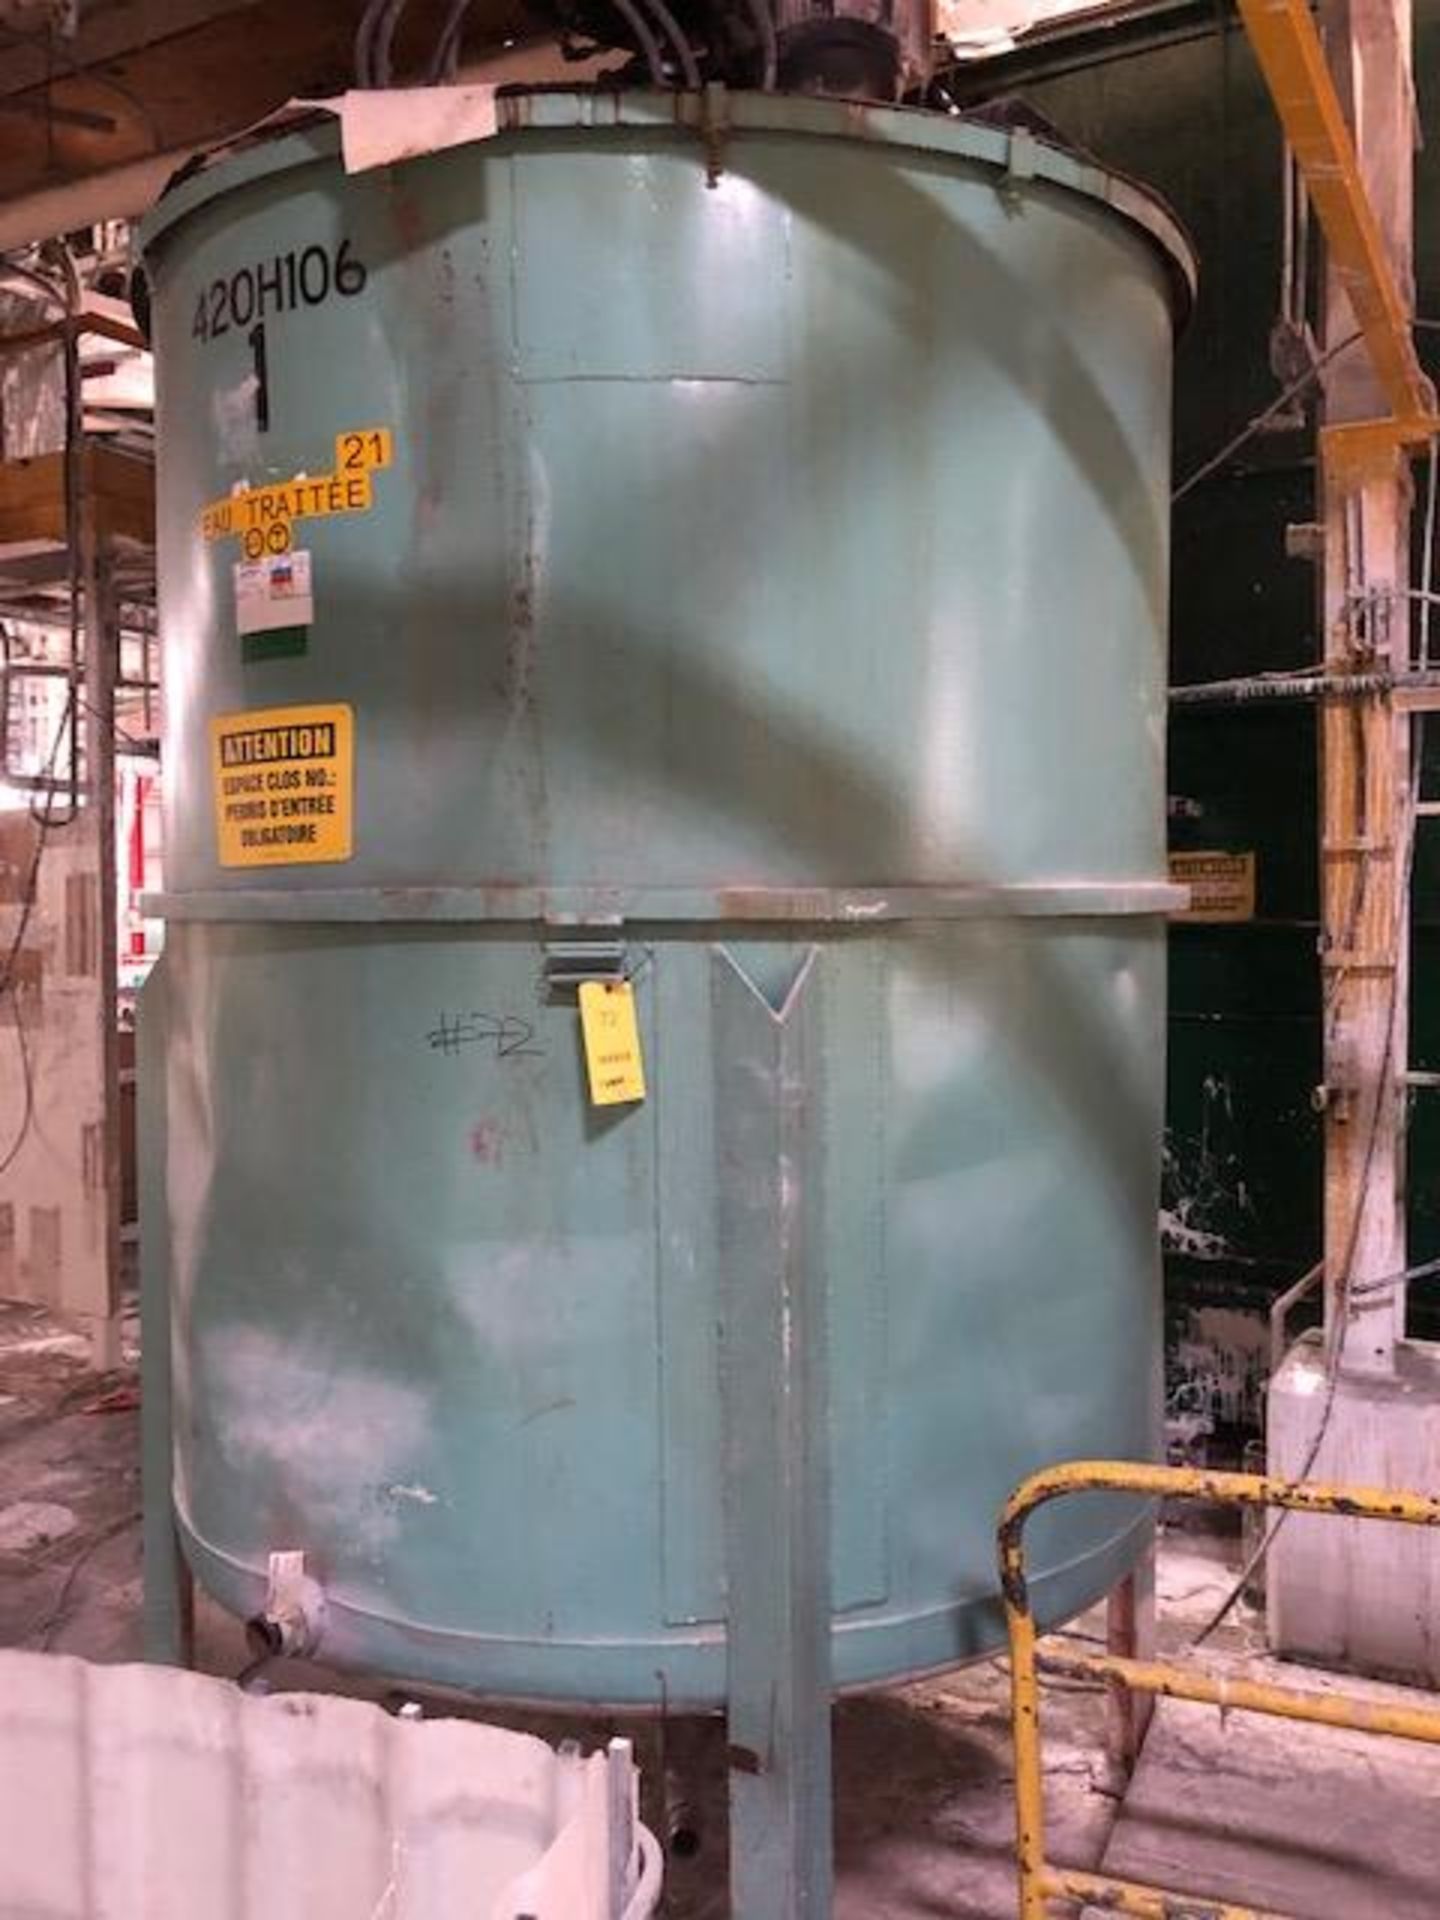 Tank 1, 1500 gals,Stainless Steel, round 72"dia x 84" high, Motor 10hp 600v frame 256t, 1160rpm,